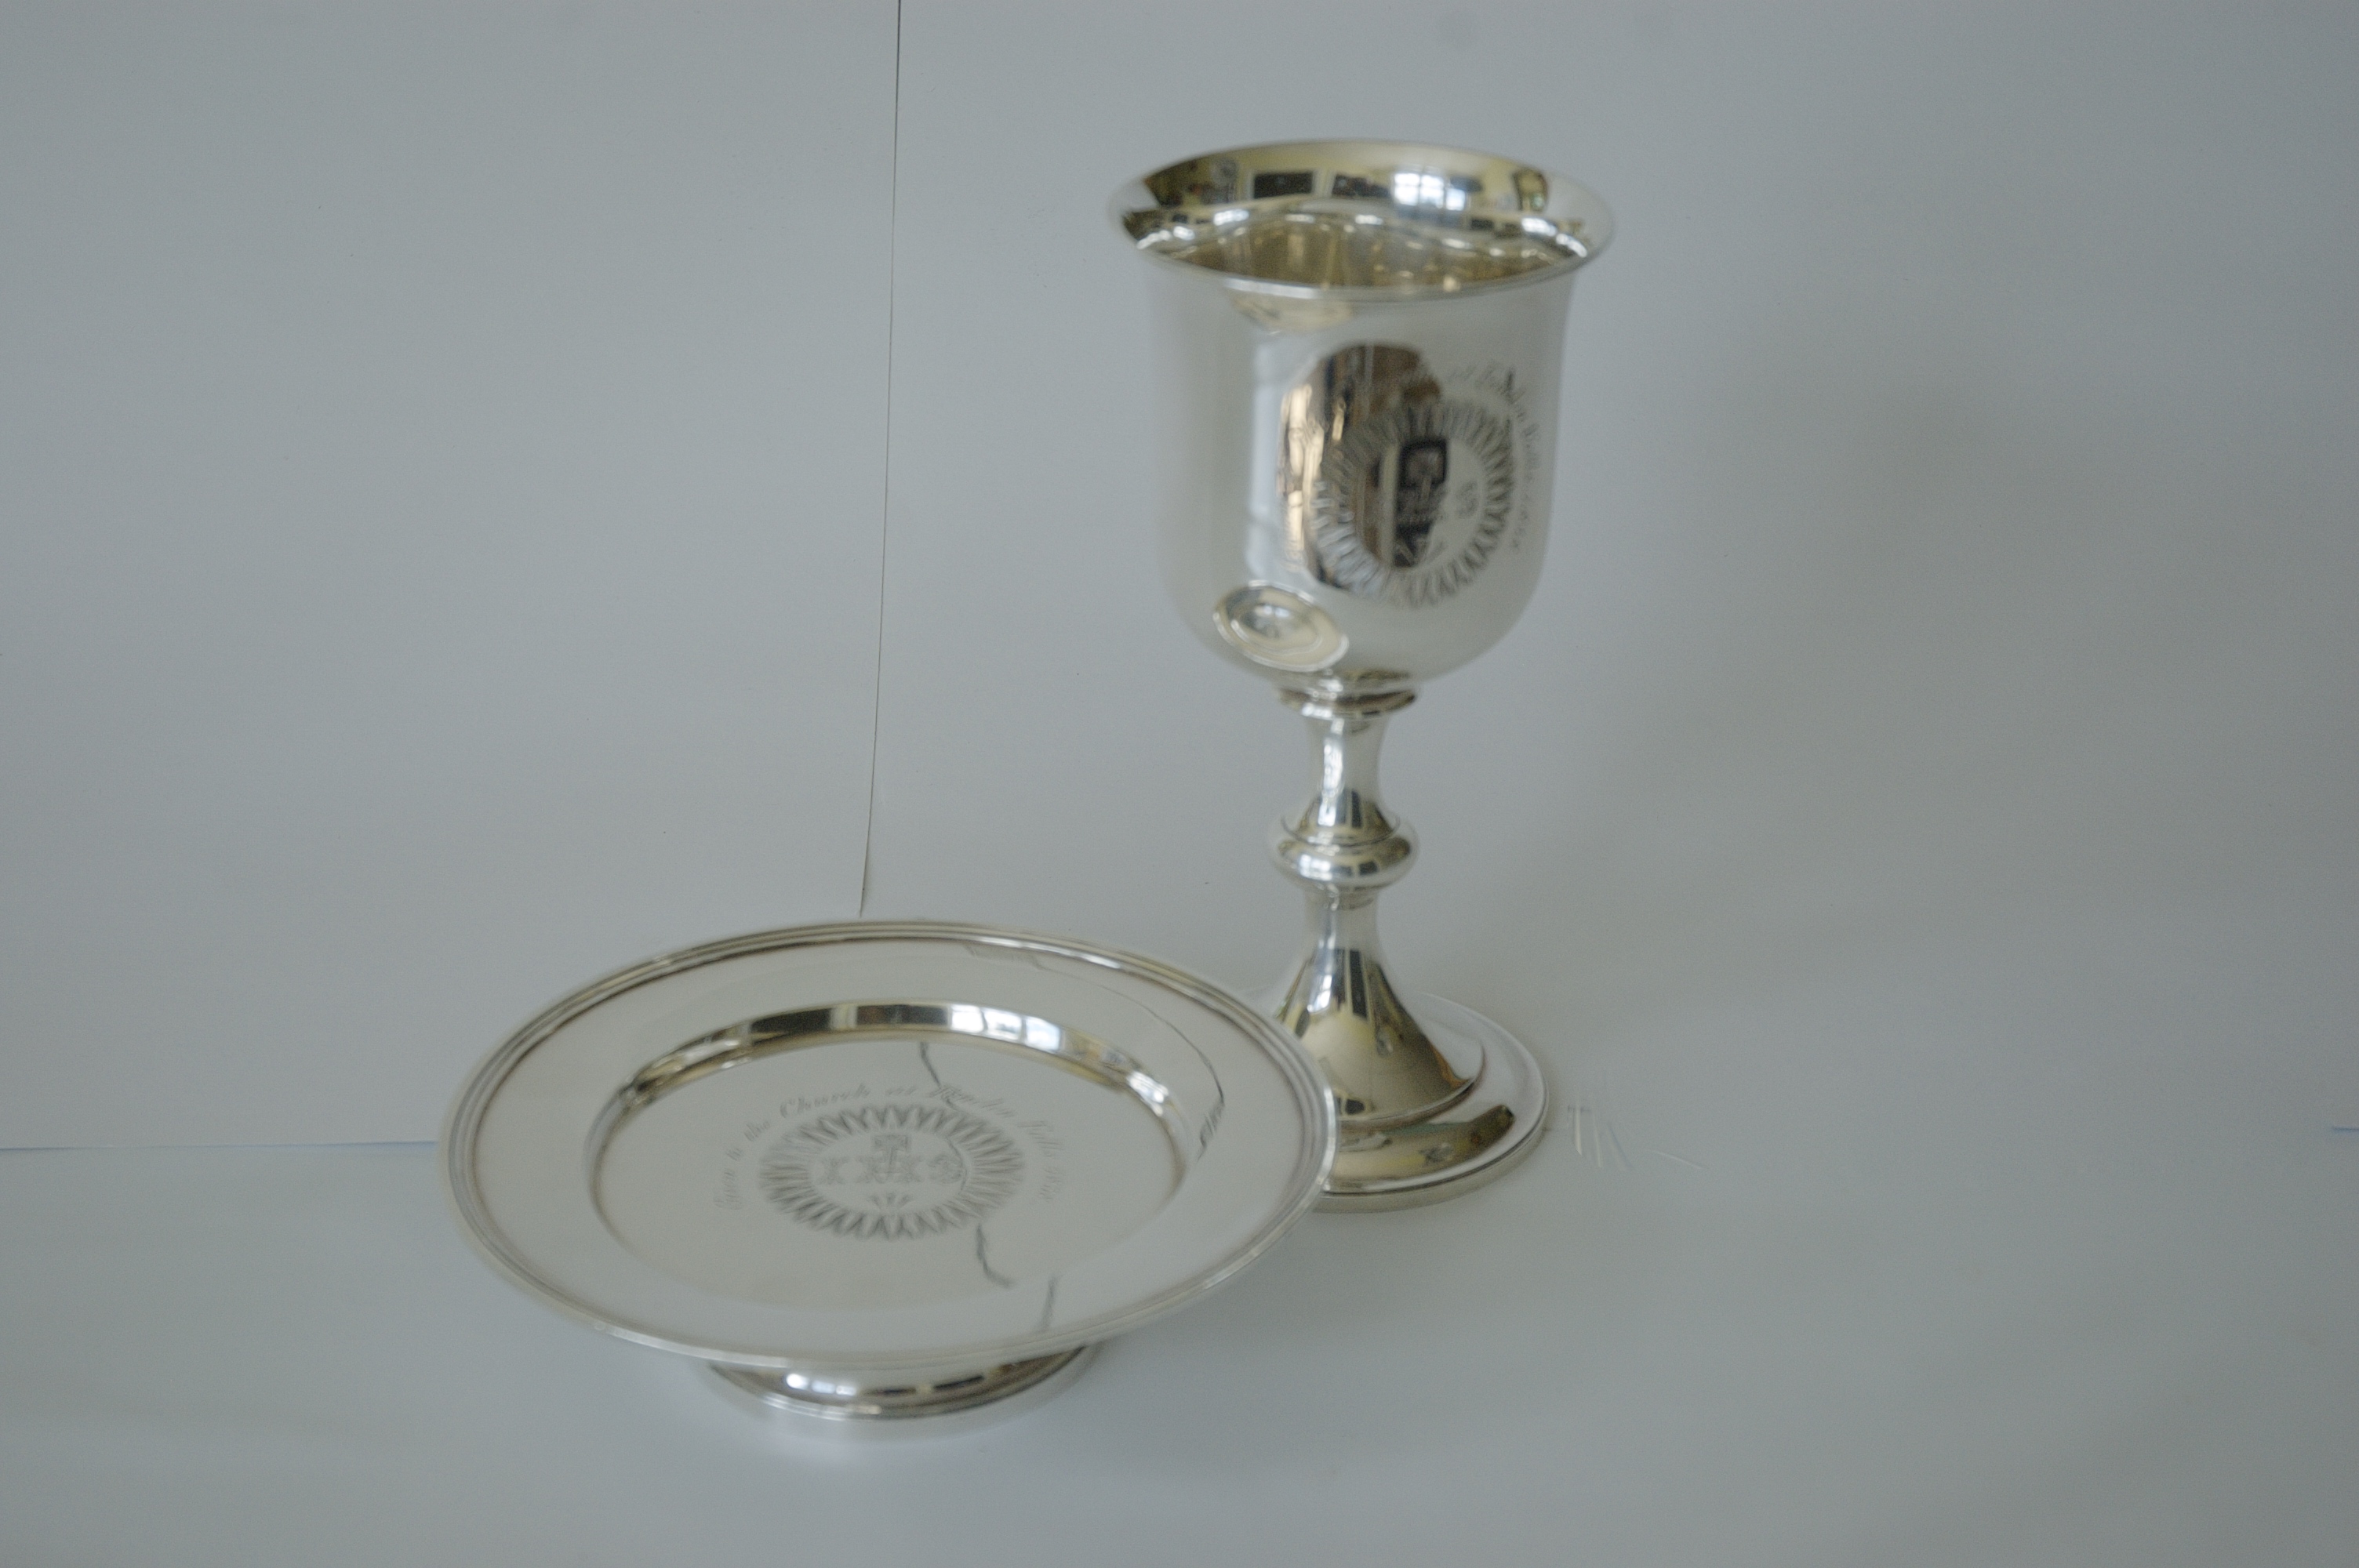 Silver communion plate used to serve bread; and silver chalice used to serve communion wine.